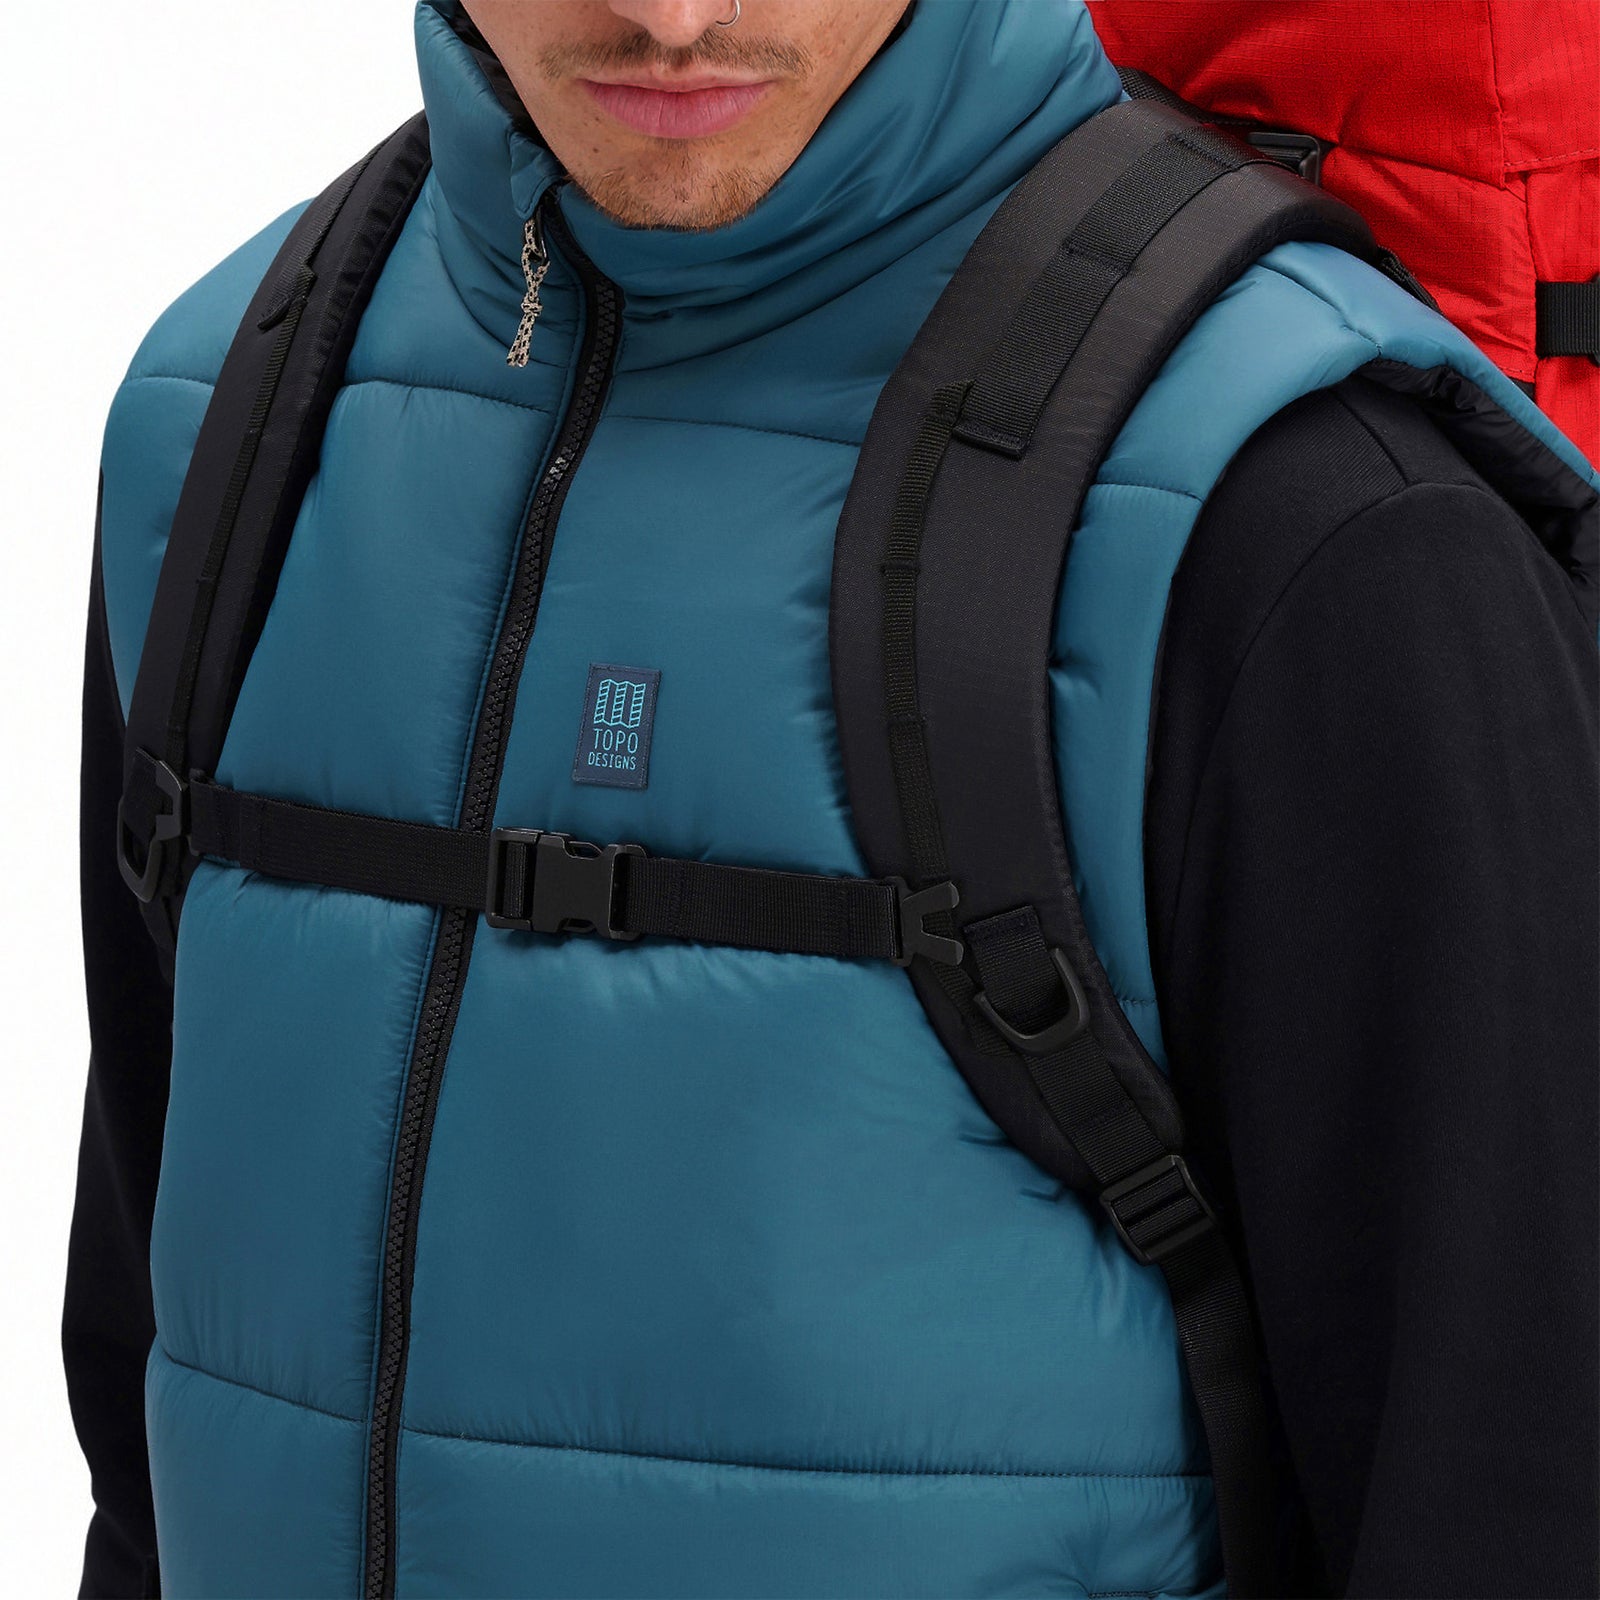 General shot of model wearing sternum strap on Topo Designs Mountain Pack 28L hiking backpack with external laptop sleeve access in lightweight recycled "Red / Turquoise" nylon.